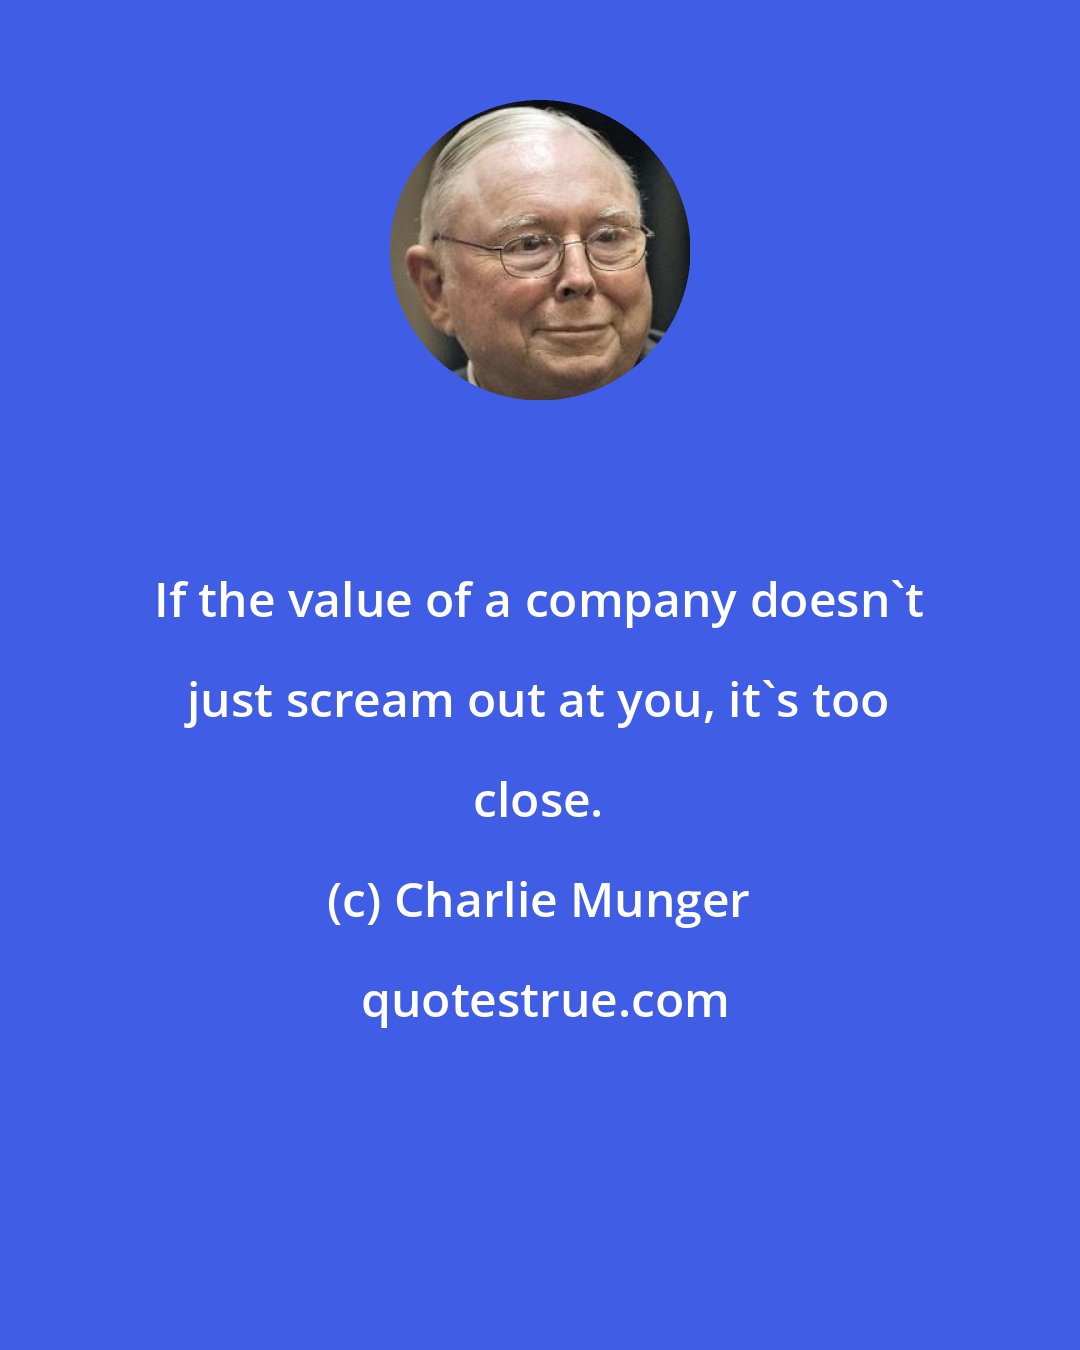 Charlie Munger: If the value of a company doesn't just scream out at you, it's too close.